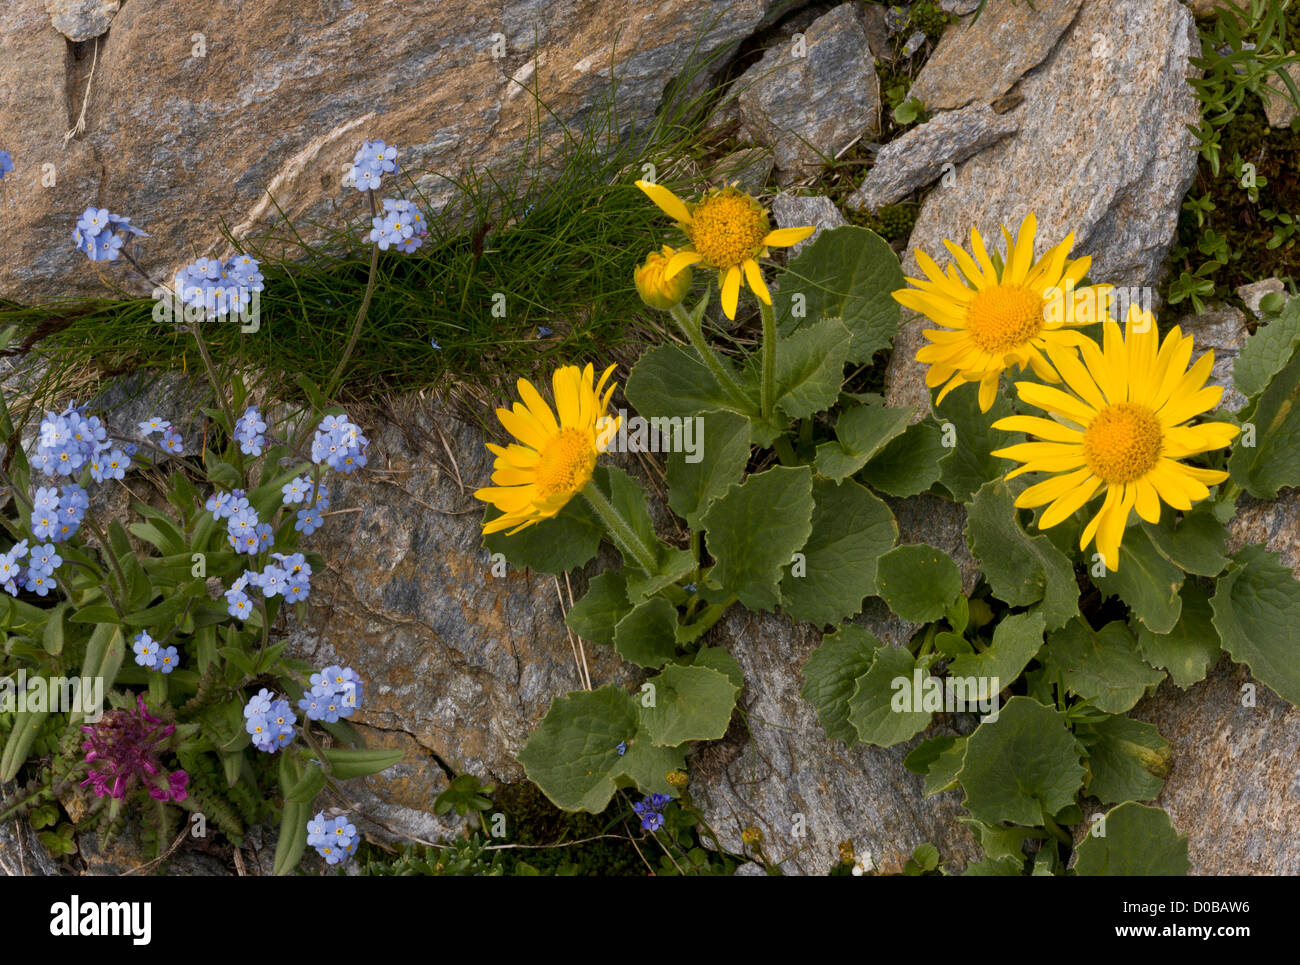 Large-flowered Leopard's Bane (Doronicum grandiflorum) with alpine forget-me-not, in flower, Vanoise National Park, France. Stock Photo